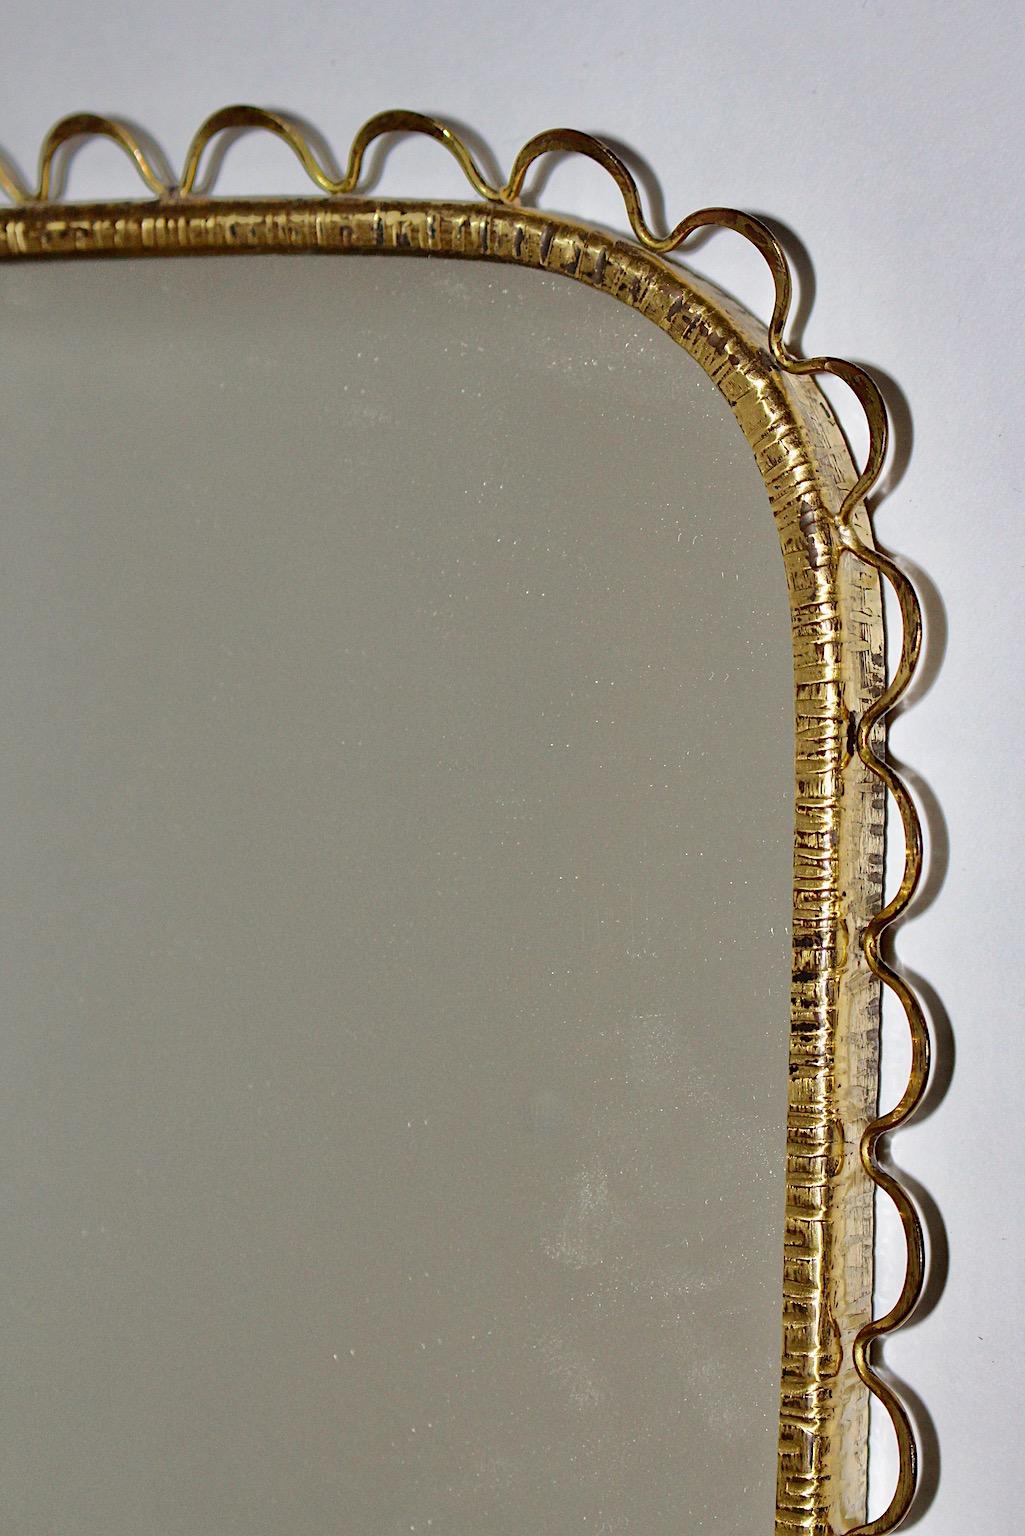 20th Century Mid-Century Modern Vintage Rectangular Brass Wall Mirror with Loops 1950s Italy For Sale